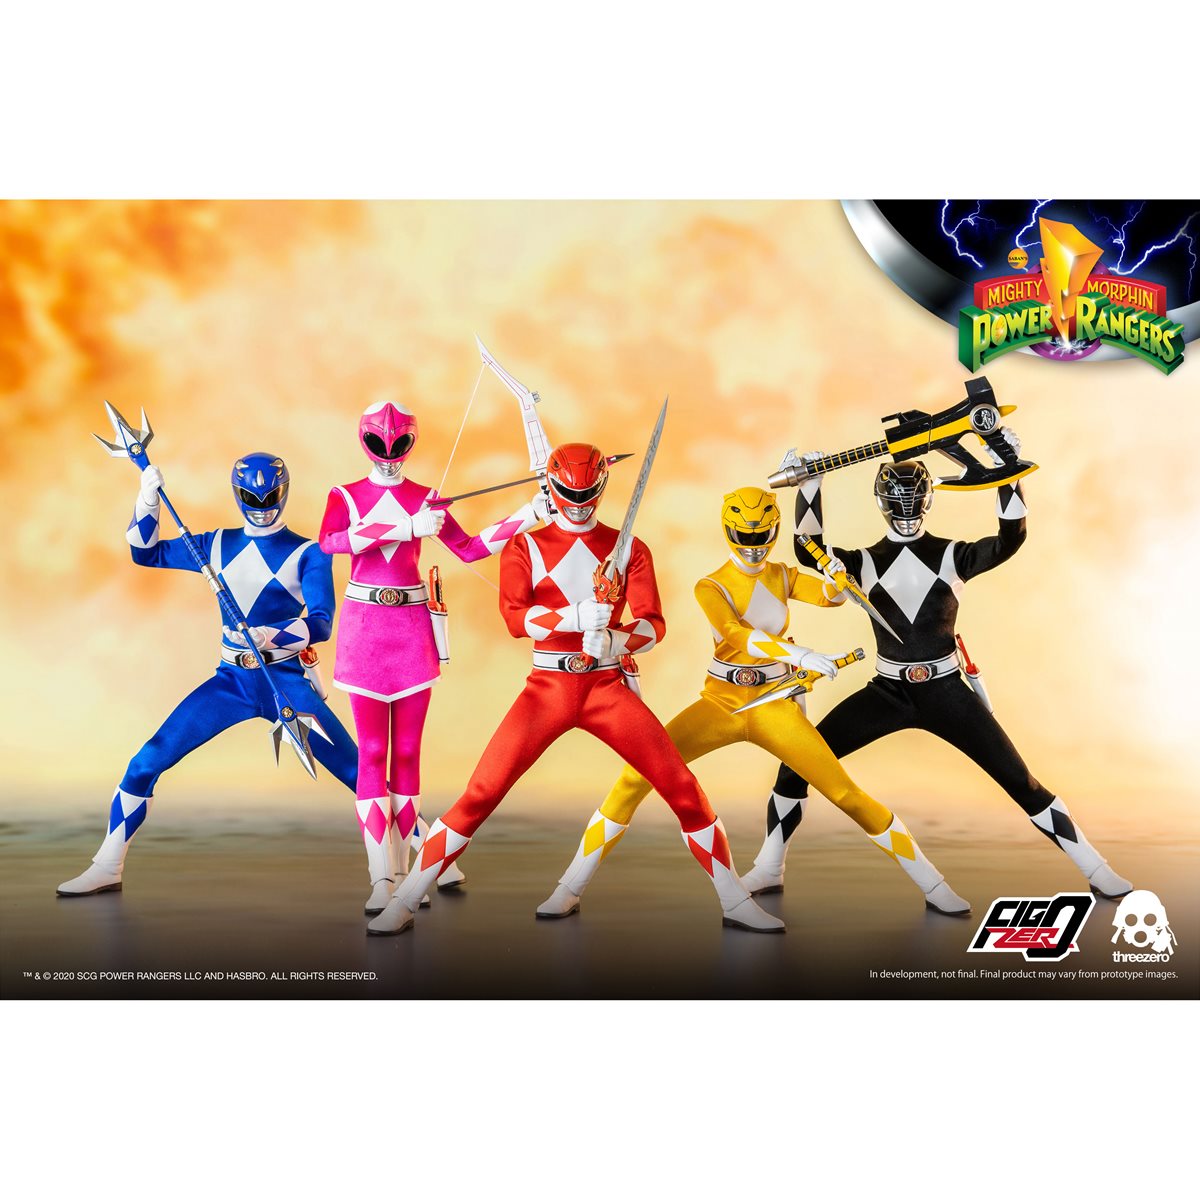 Mighty Morphin Rangers 1:6 Scale Figure Complete Set